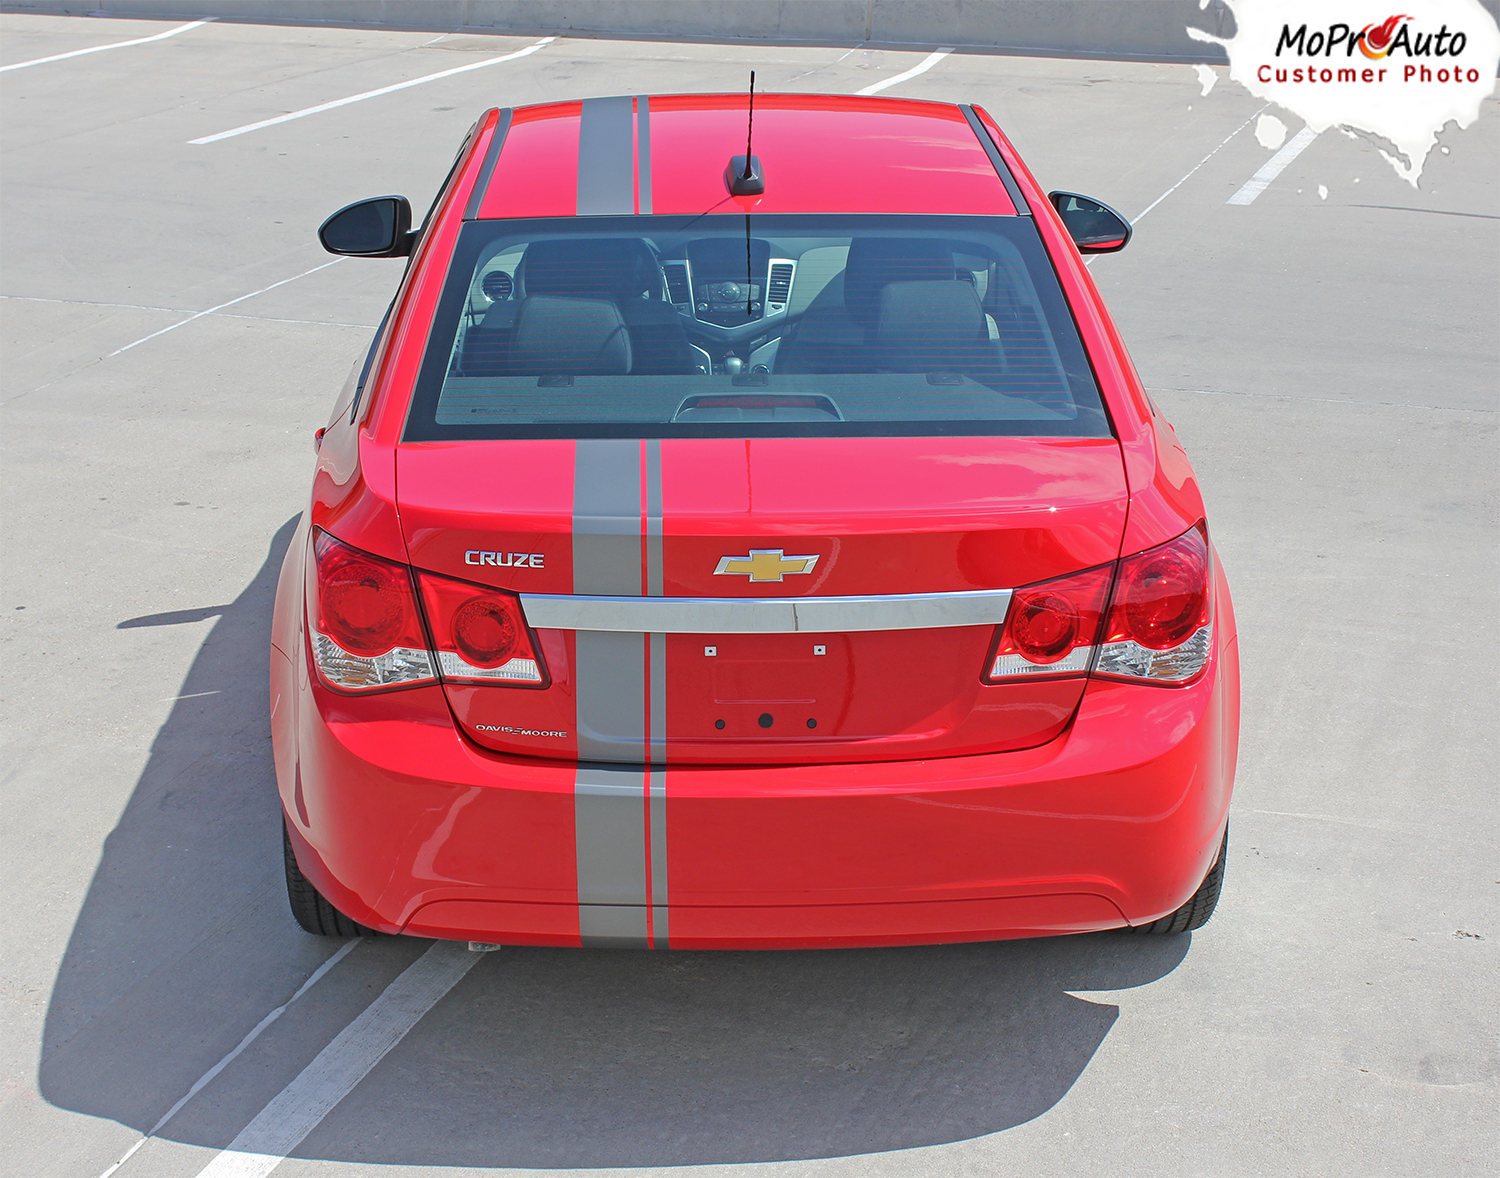 Chevy Cruze RALLY STRIPES Vinyl Graphics, Stripes and Decals Set